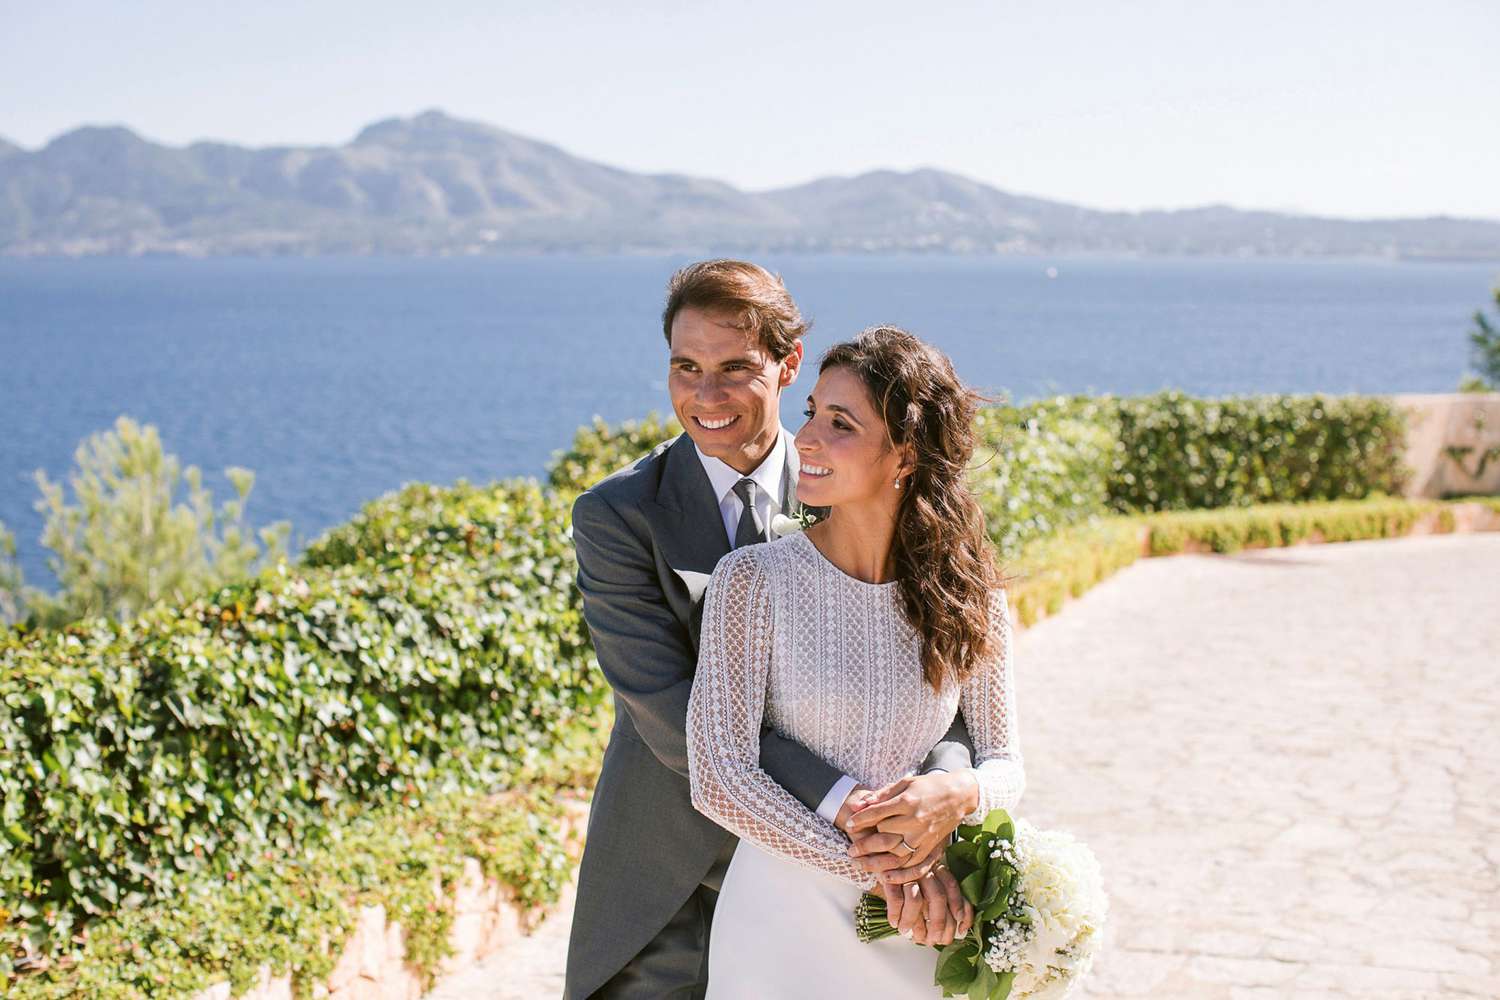 <p>The tennis star and Perell&oacute; got married on Oct. 19 on Mallorca, a Spanish island in the Mediterranean and Nadal's hometown, according to AFP.</p>
                            <p>Wearing a gown designed by Rosa Clar&aacute;, the bride served up sheer elegance to match the newlyweds' picturesque big day. Perell&oacute;, in photos shared on the designer's official Instagram, can be seen in a long-sleeved dress, which includes a jeweled neckline, floral motifs, and microbeads on hand-embroidered fabric.</p>
                            <p>"The whole process was full of emotions between all of us," Clar&aacute; captioned a video showcasing the outfit's creation process. "We just want to thank the whole family for trusting in us, you're extraordinary."</p>
                            <p>Nadal and Perell&oacute; were engaged in Rome, Italy, in May, according to Hola! Spain.</p>
                            <p>While the legendary athlete has kept his relationship with Perell&oacute; private, the outlet said the two have dated for about 14 years. She hails from Nadal's hometown of Mallorca, the largest island of Spain's Balearic Islands, which are in the Mediterranean.</p>
                            